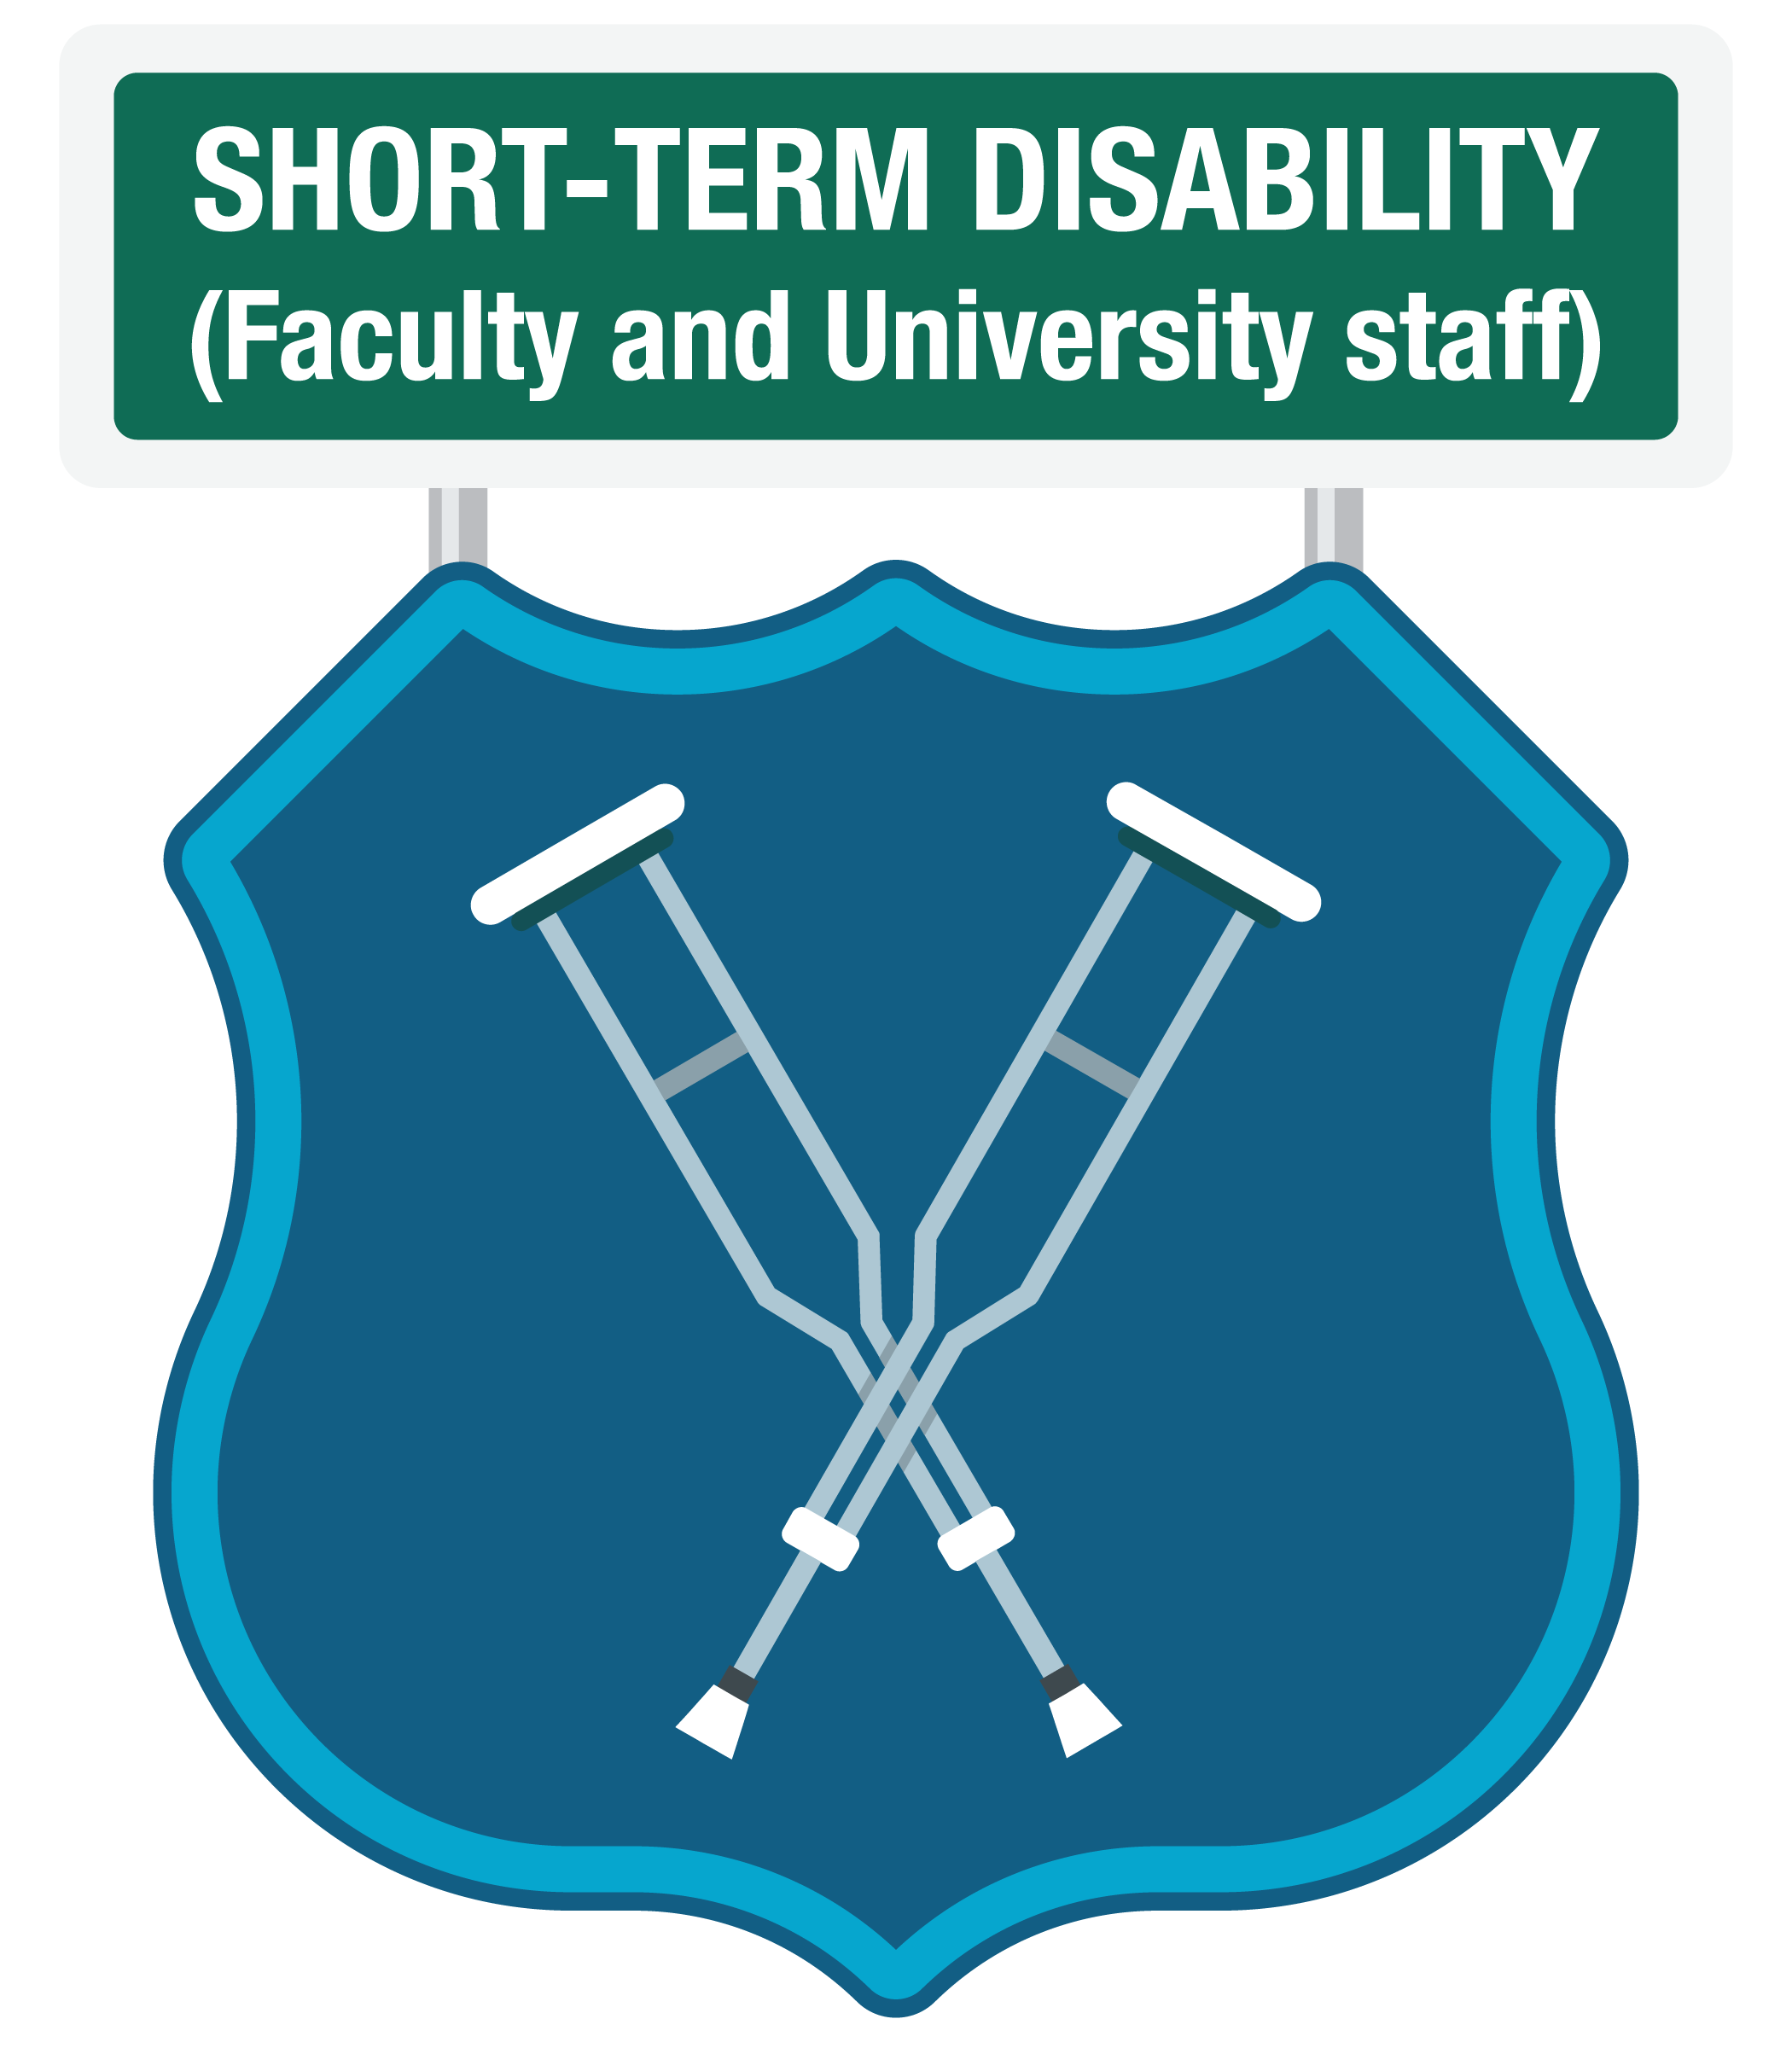 Short-term disability (faculty and university staff)